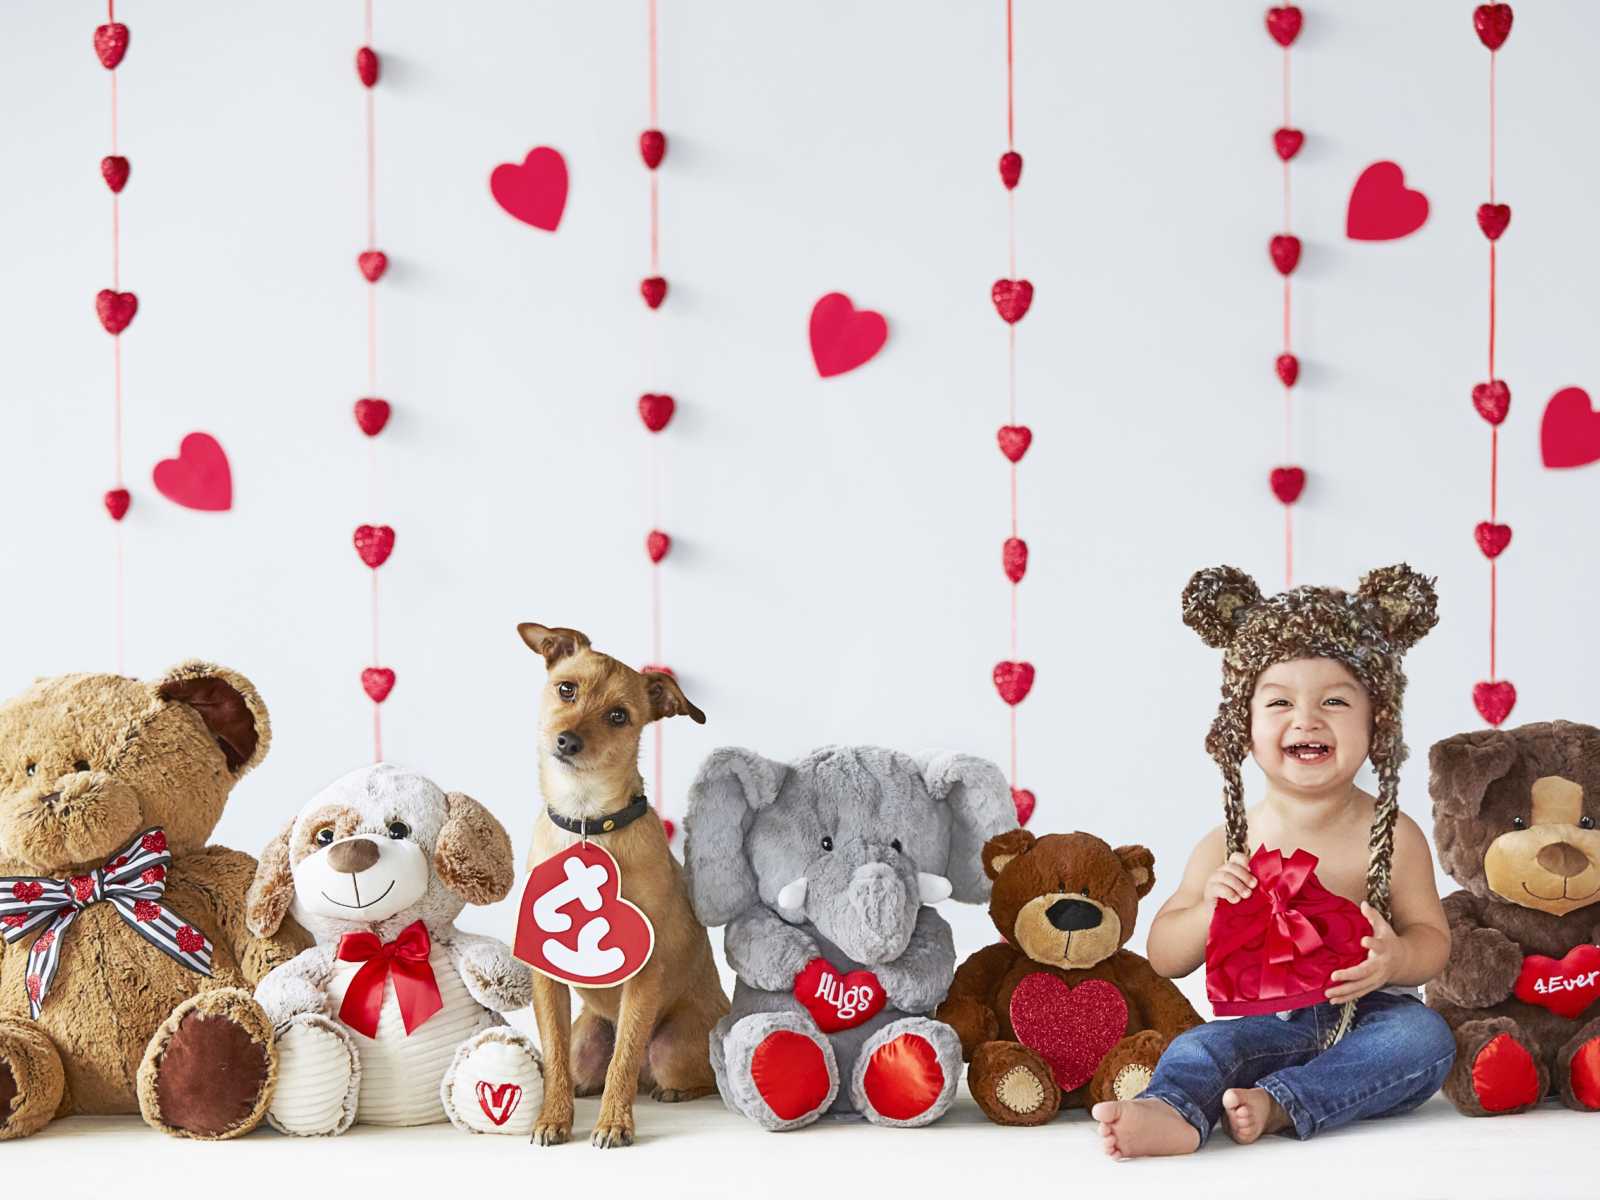 dog with "ty" heart logo around neck amongst stuffed animals and baby sitting next to them holding heart-shaped box 